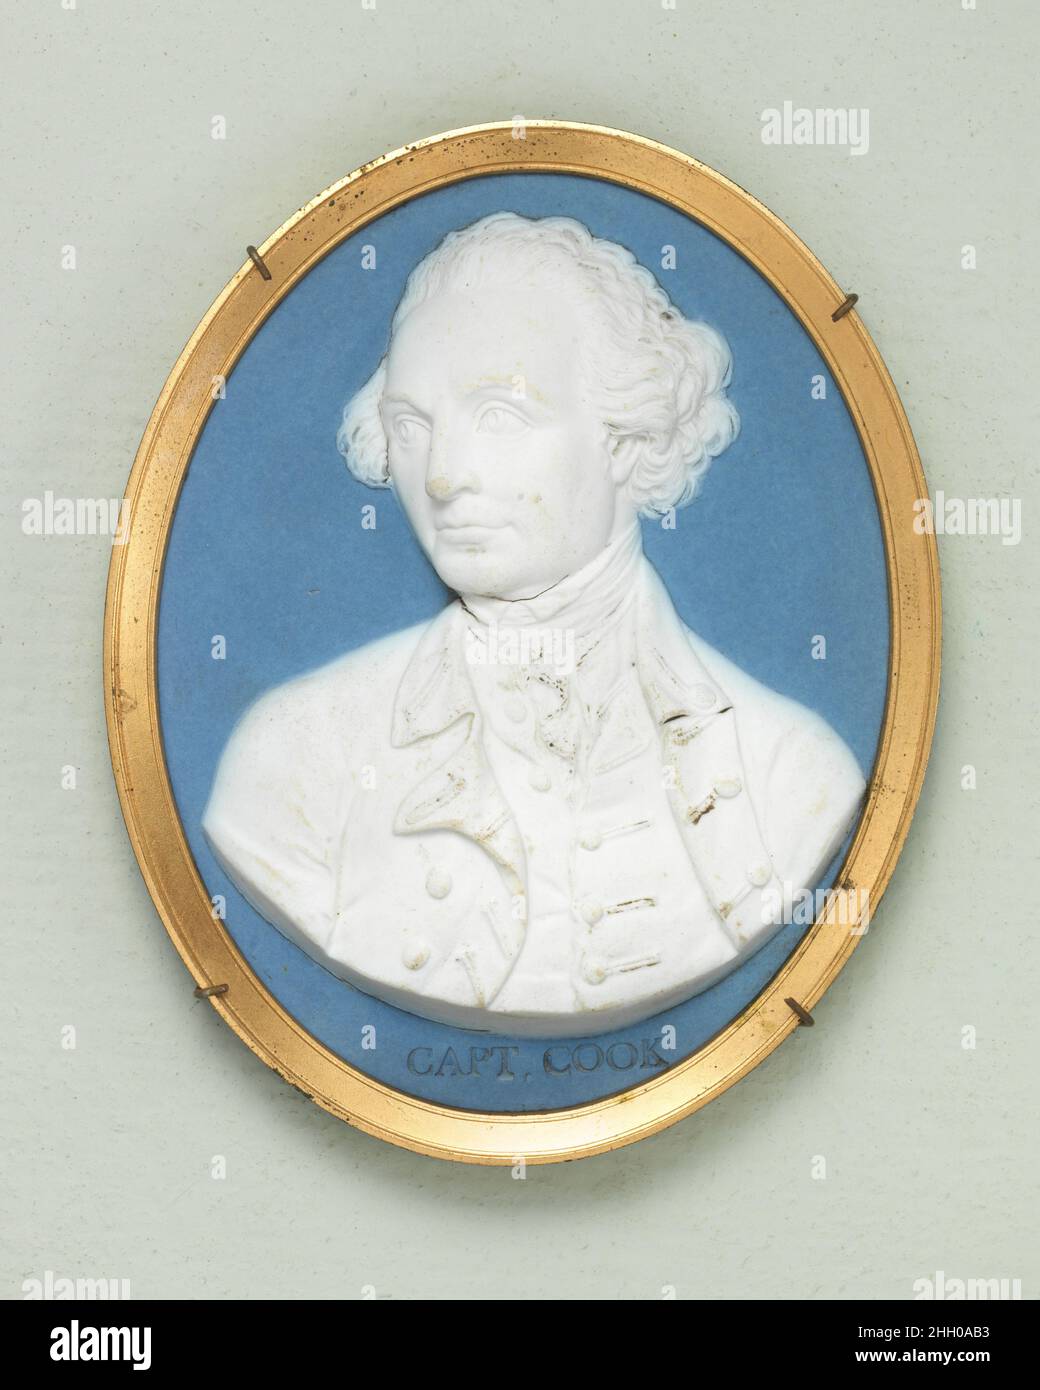 Captain James Cook late 18th century Wedgwood and Bentley Cameo medallions with portrait reliefs were made by Josiah Wedgwood between 1765 and 1795, with Thomas Bentley as his partner from 1769 to 1780. Black basalt and jasper are both types of fine stoneware hard enough for the delicate modeling which distinguishes Wedgwood's portrait cameos of 'Illustious Ancents and Moderns.'. Captain James Cook. British, Etruria, Staffordshire. late 18th century. Jasperware. Ceramics-Pottery Stock Photo